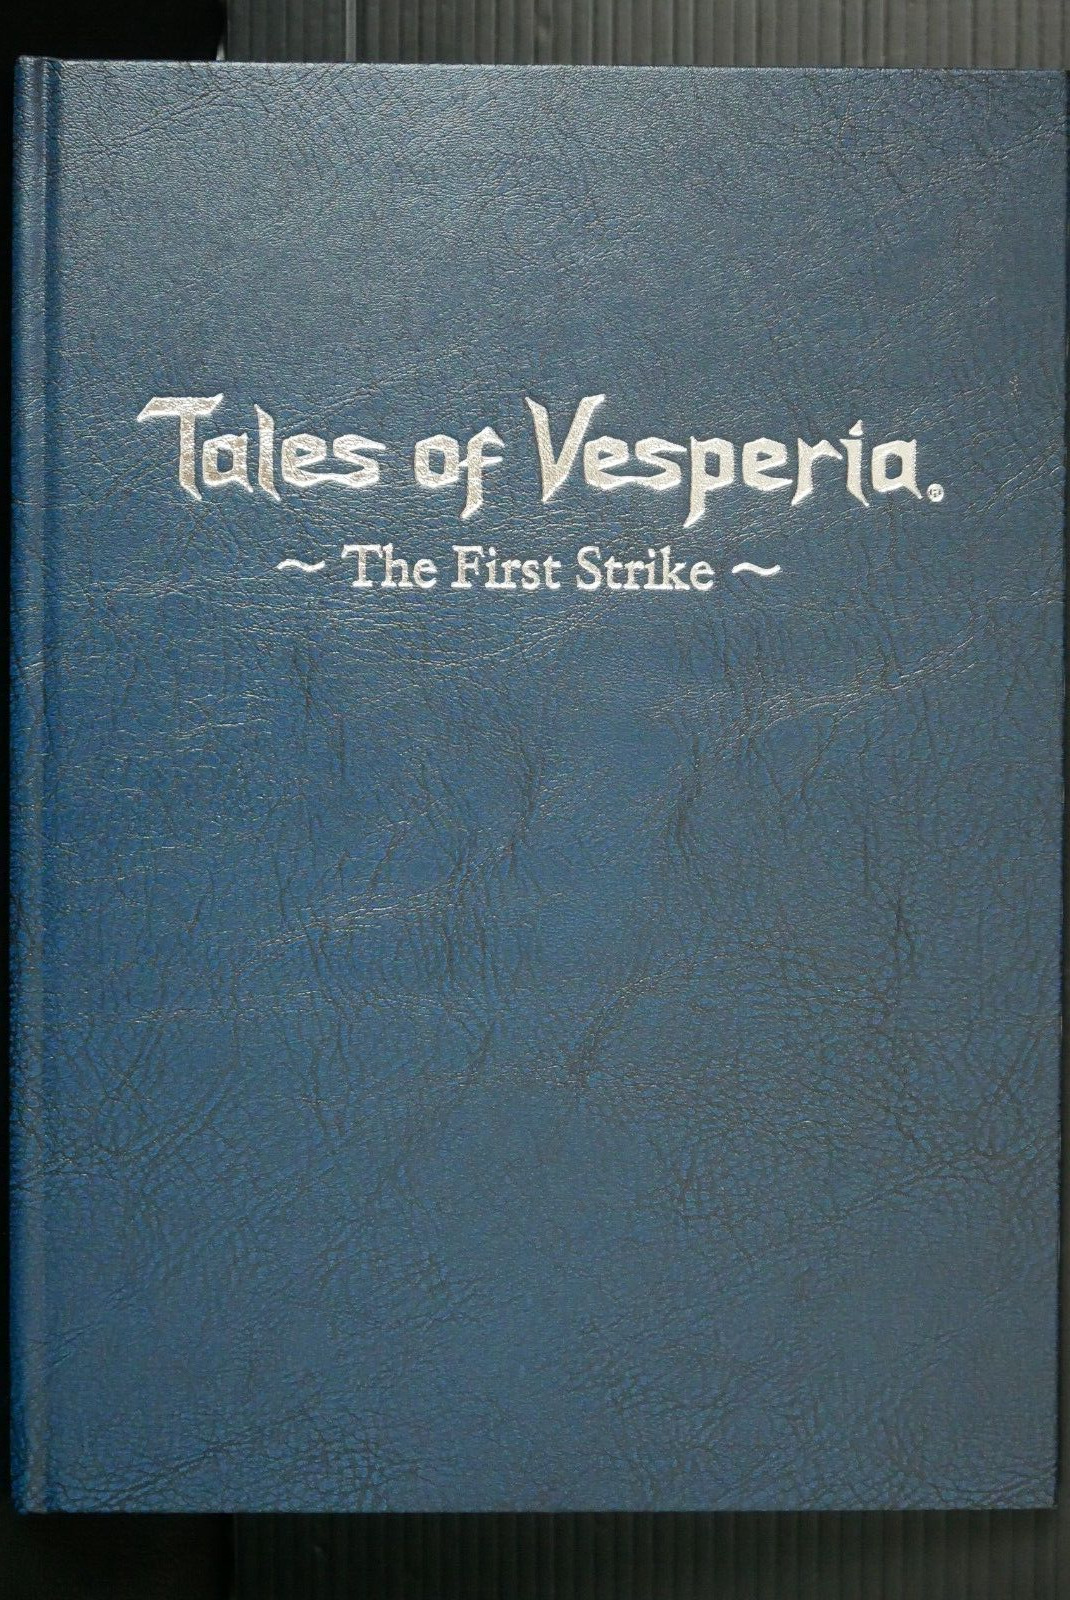 JAPAN Tales of Vesperia The First Strike Pamphlet Deluxe Edition (First edition)